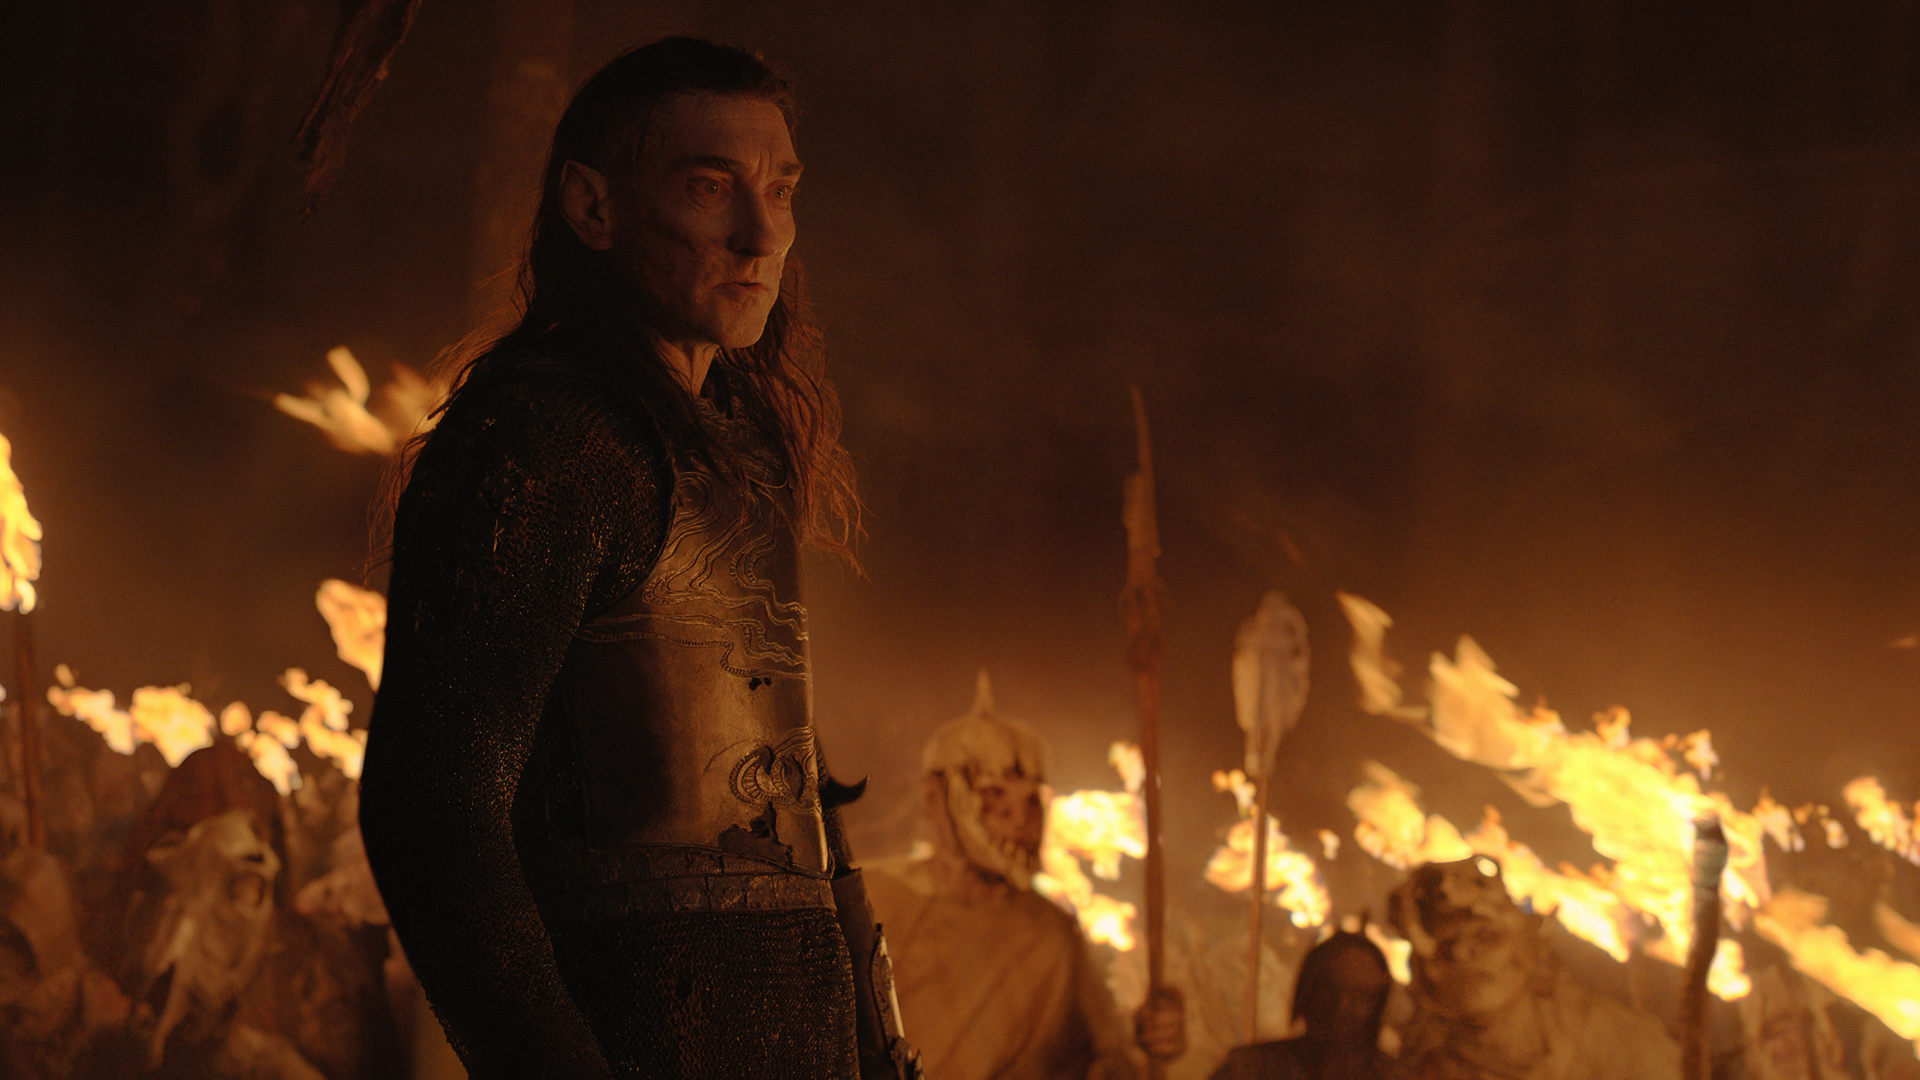 Adar addresses his orc army by fire light in The Rings of Power episode 6